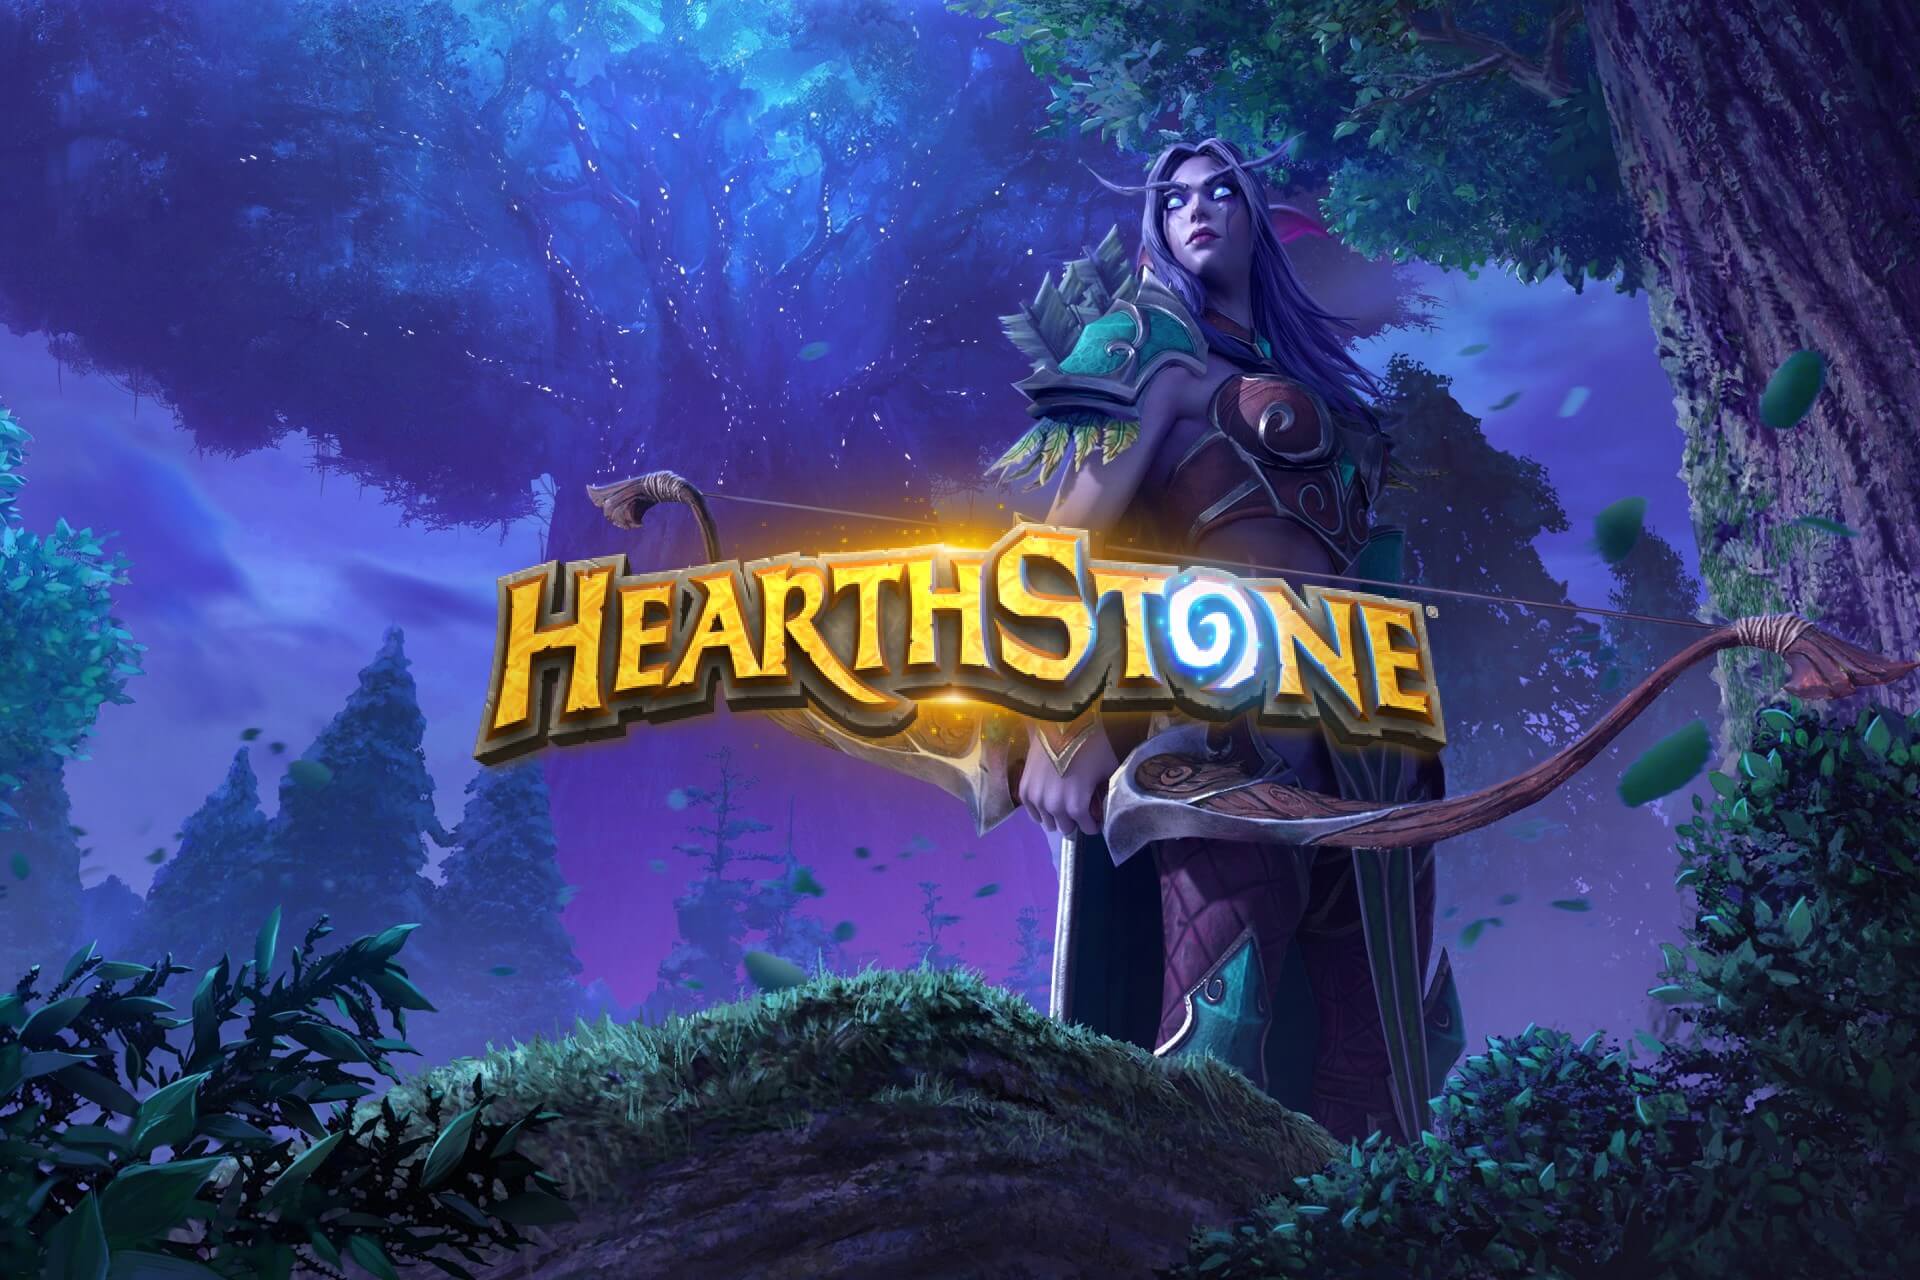 How To Get A 5120x1440p 329 Hearthstone Game Board Background On Your Computer